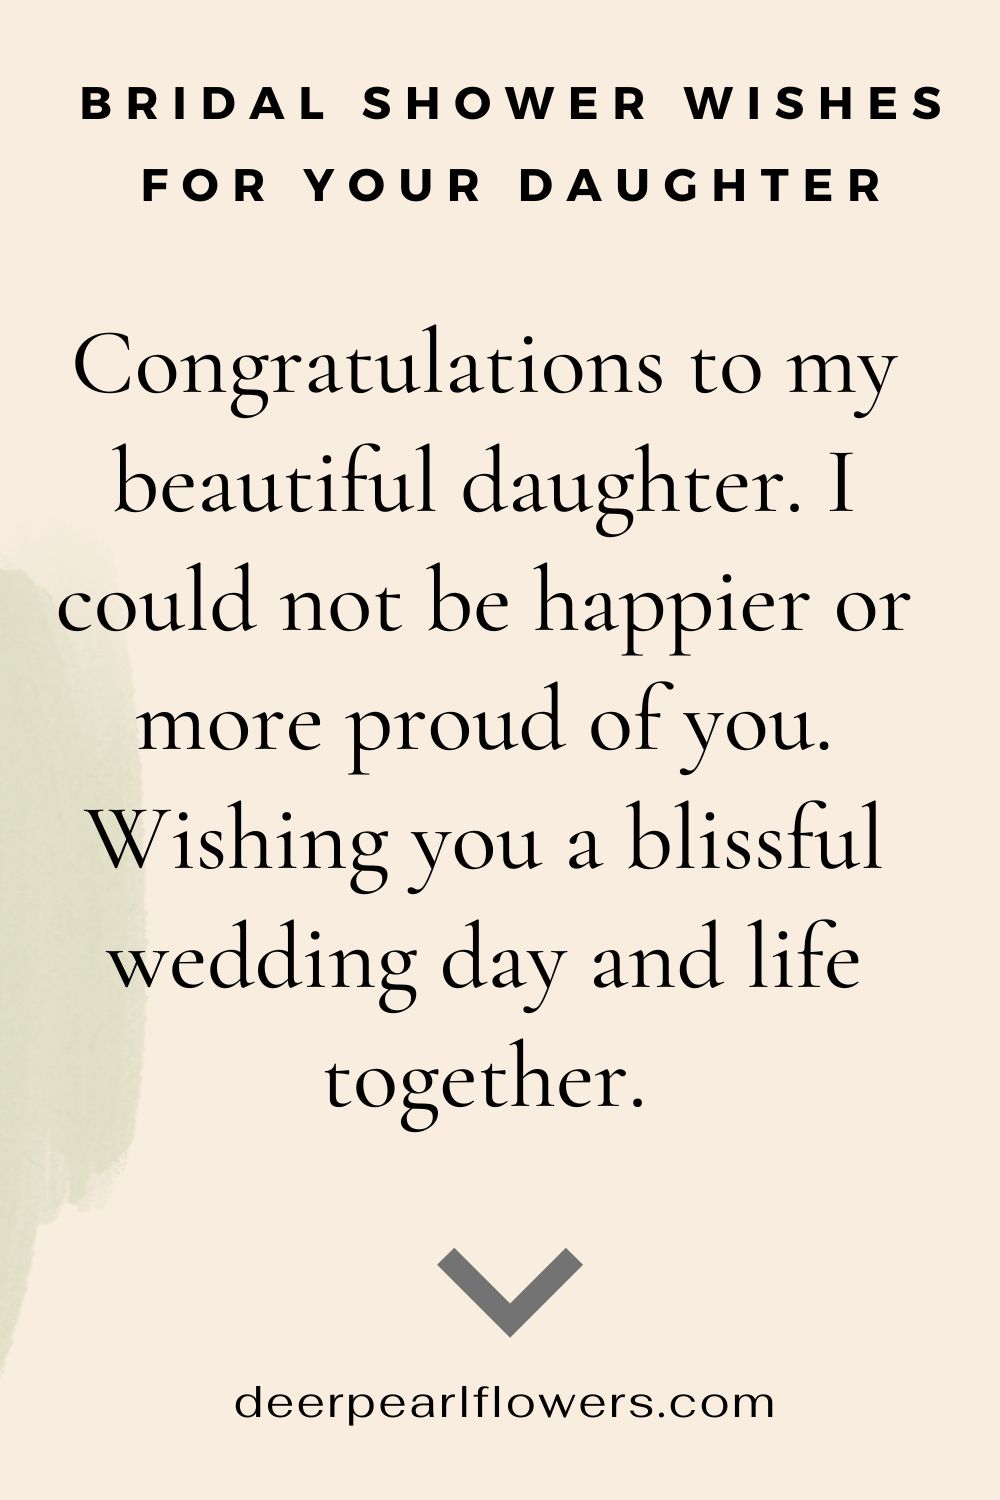 Bridal Shower Wishes for Your Daughter5